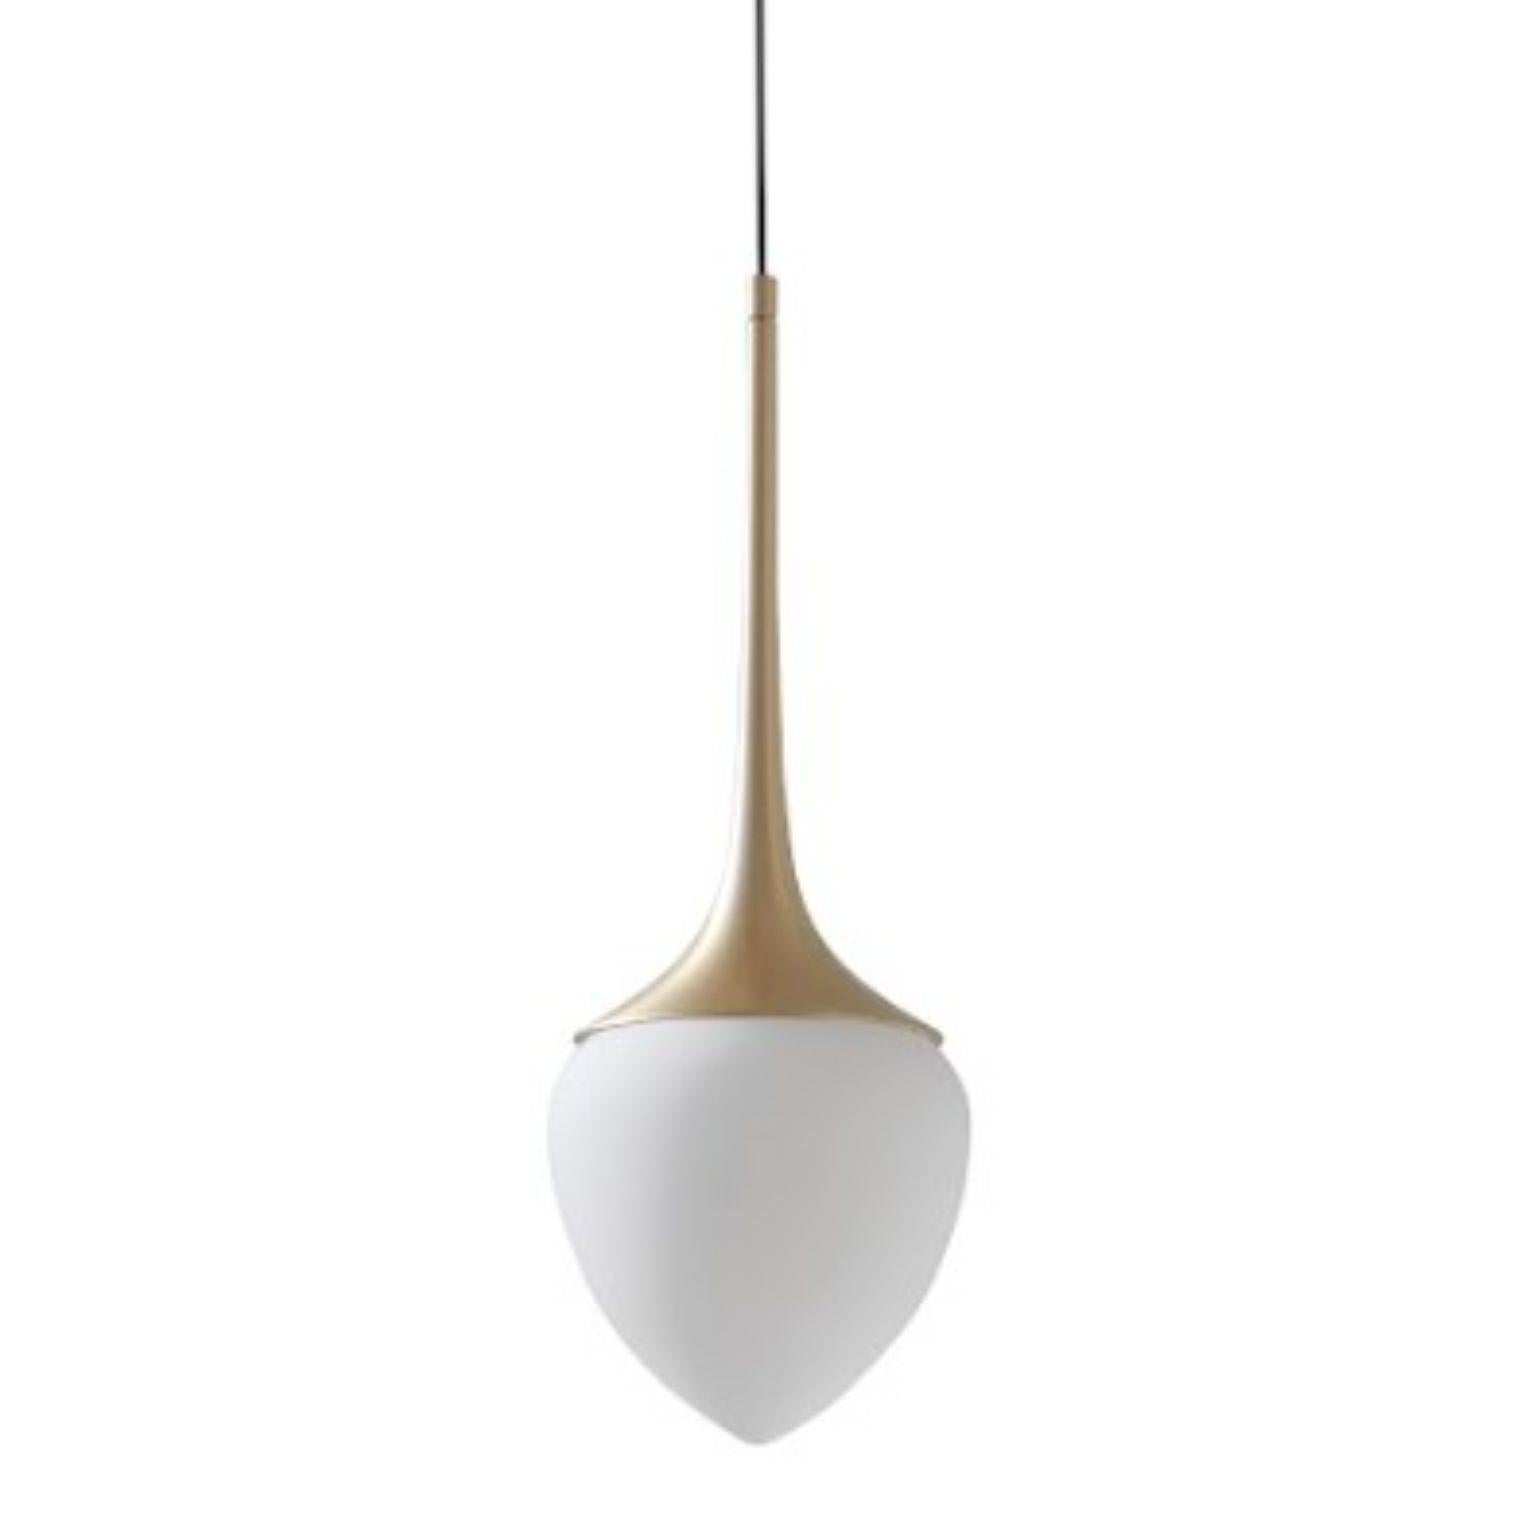 Louis XL Pendant by Emilie Cathelineau
Dimensions: D 21 x H 260.3 cm
Materials: Solid brass, Mouth-blown glass, Textile cable
Others finishes and dimensions are available.

All our lamps can be wired according to each country. If sold to the